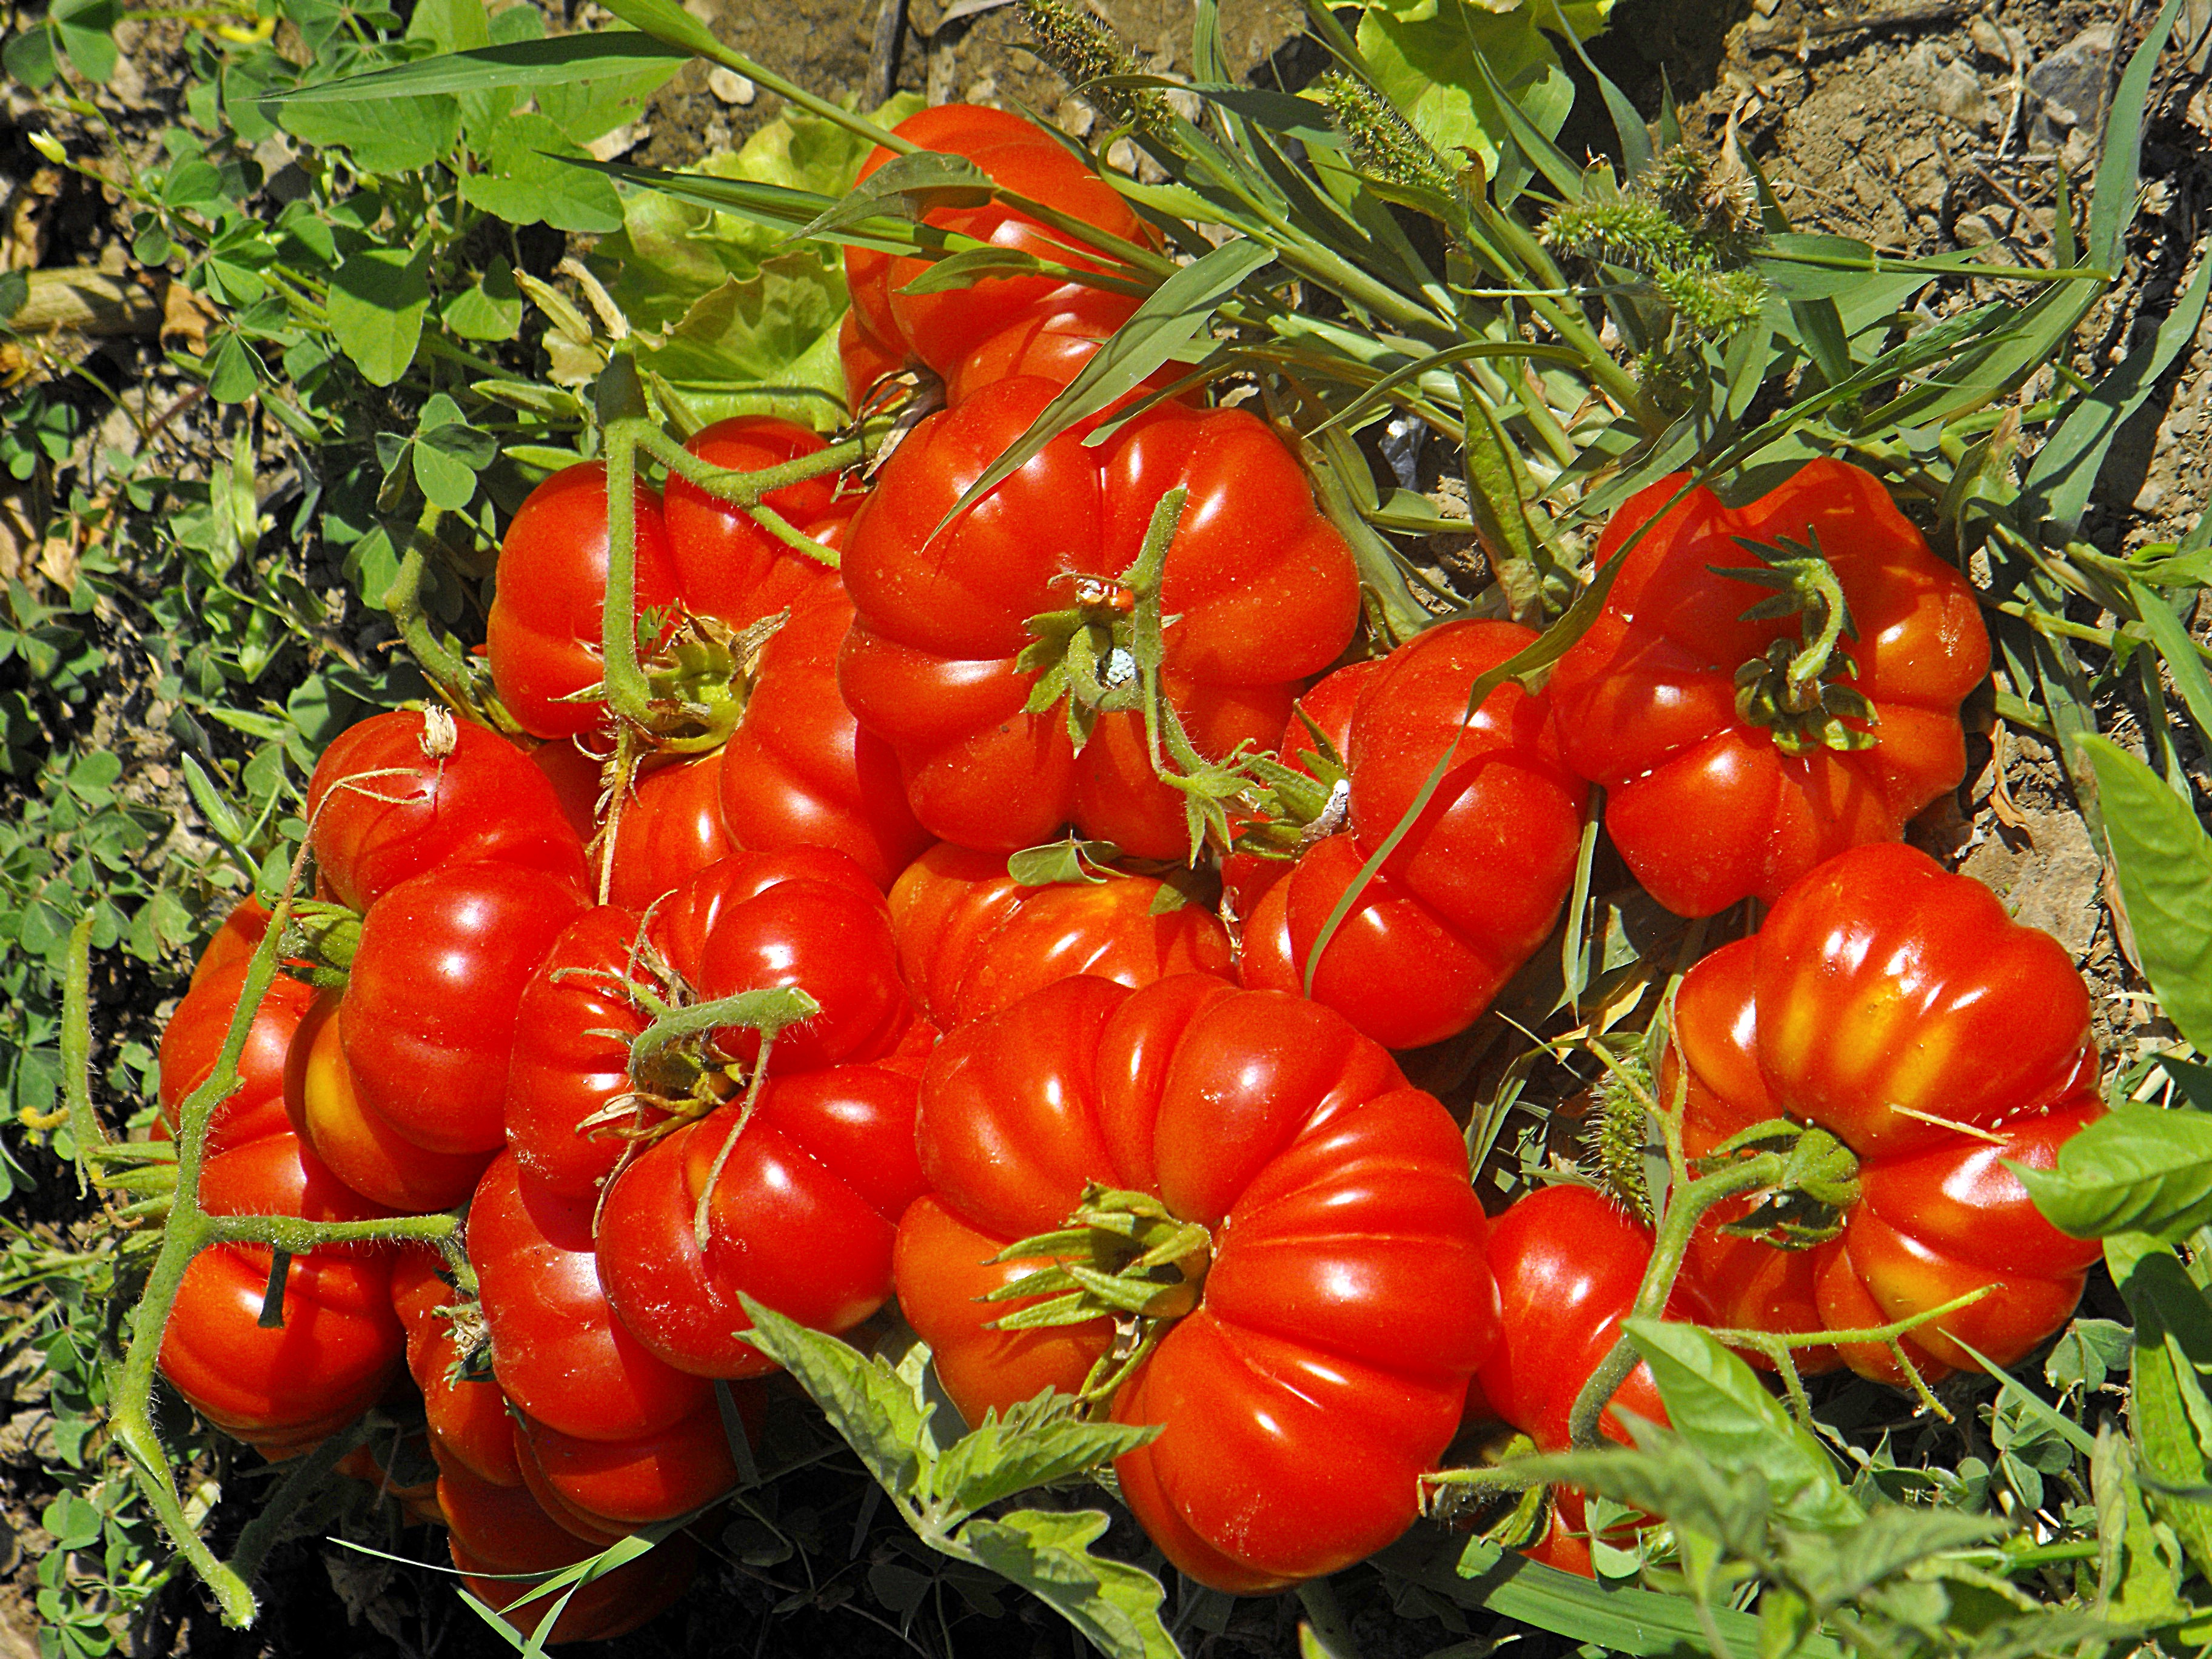 Ode to tomatoes by Pablo Neruda | Village life in Andalucia